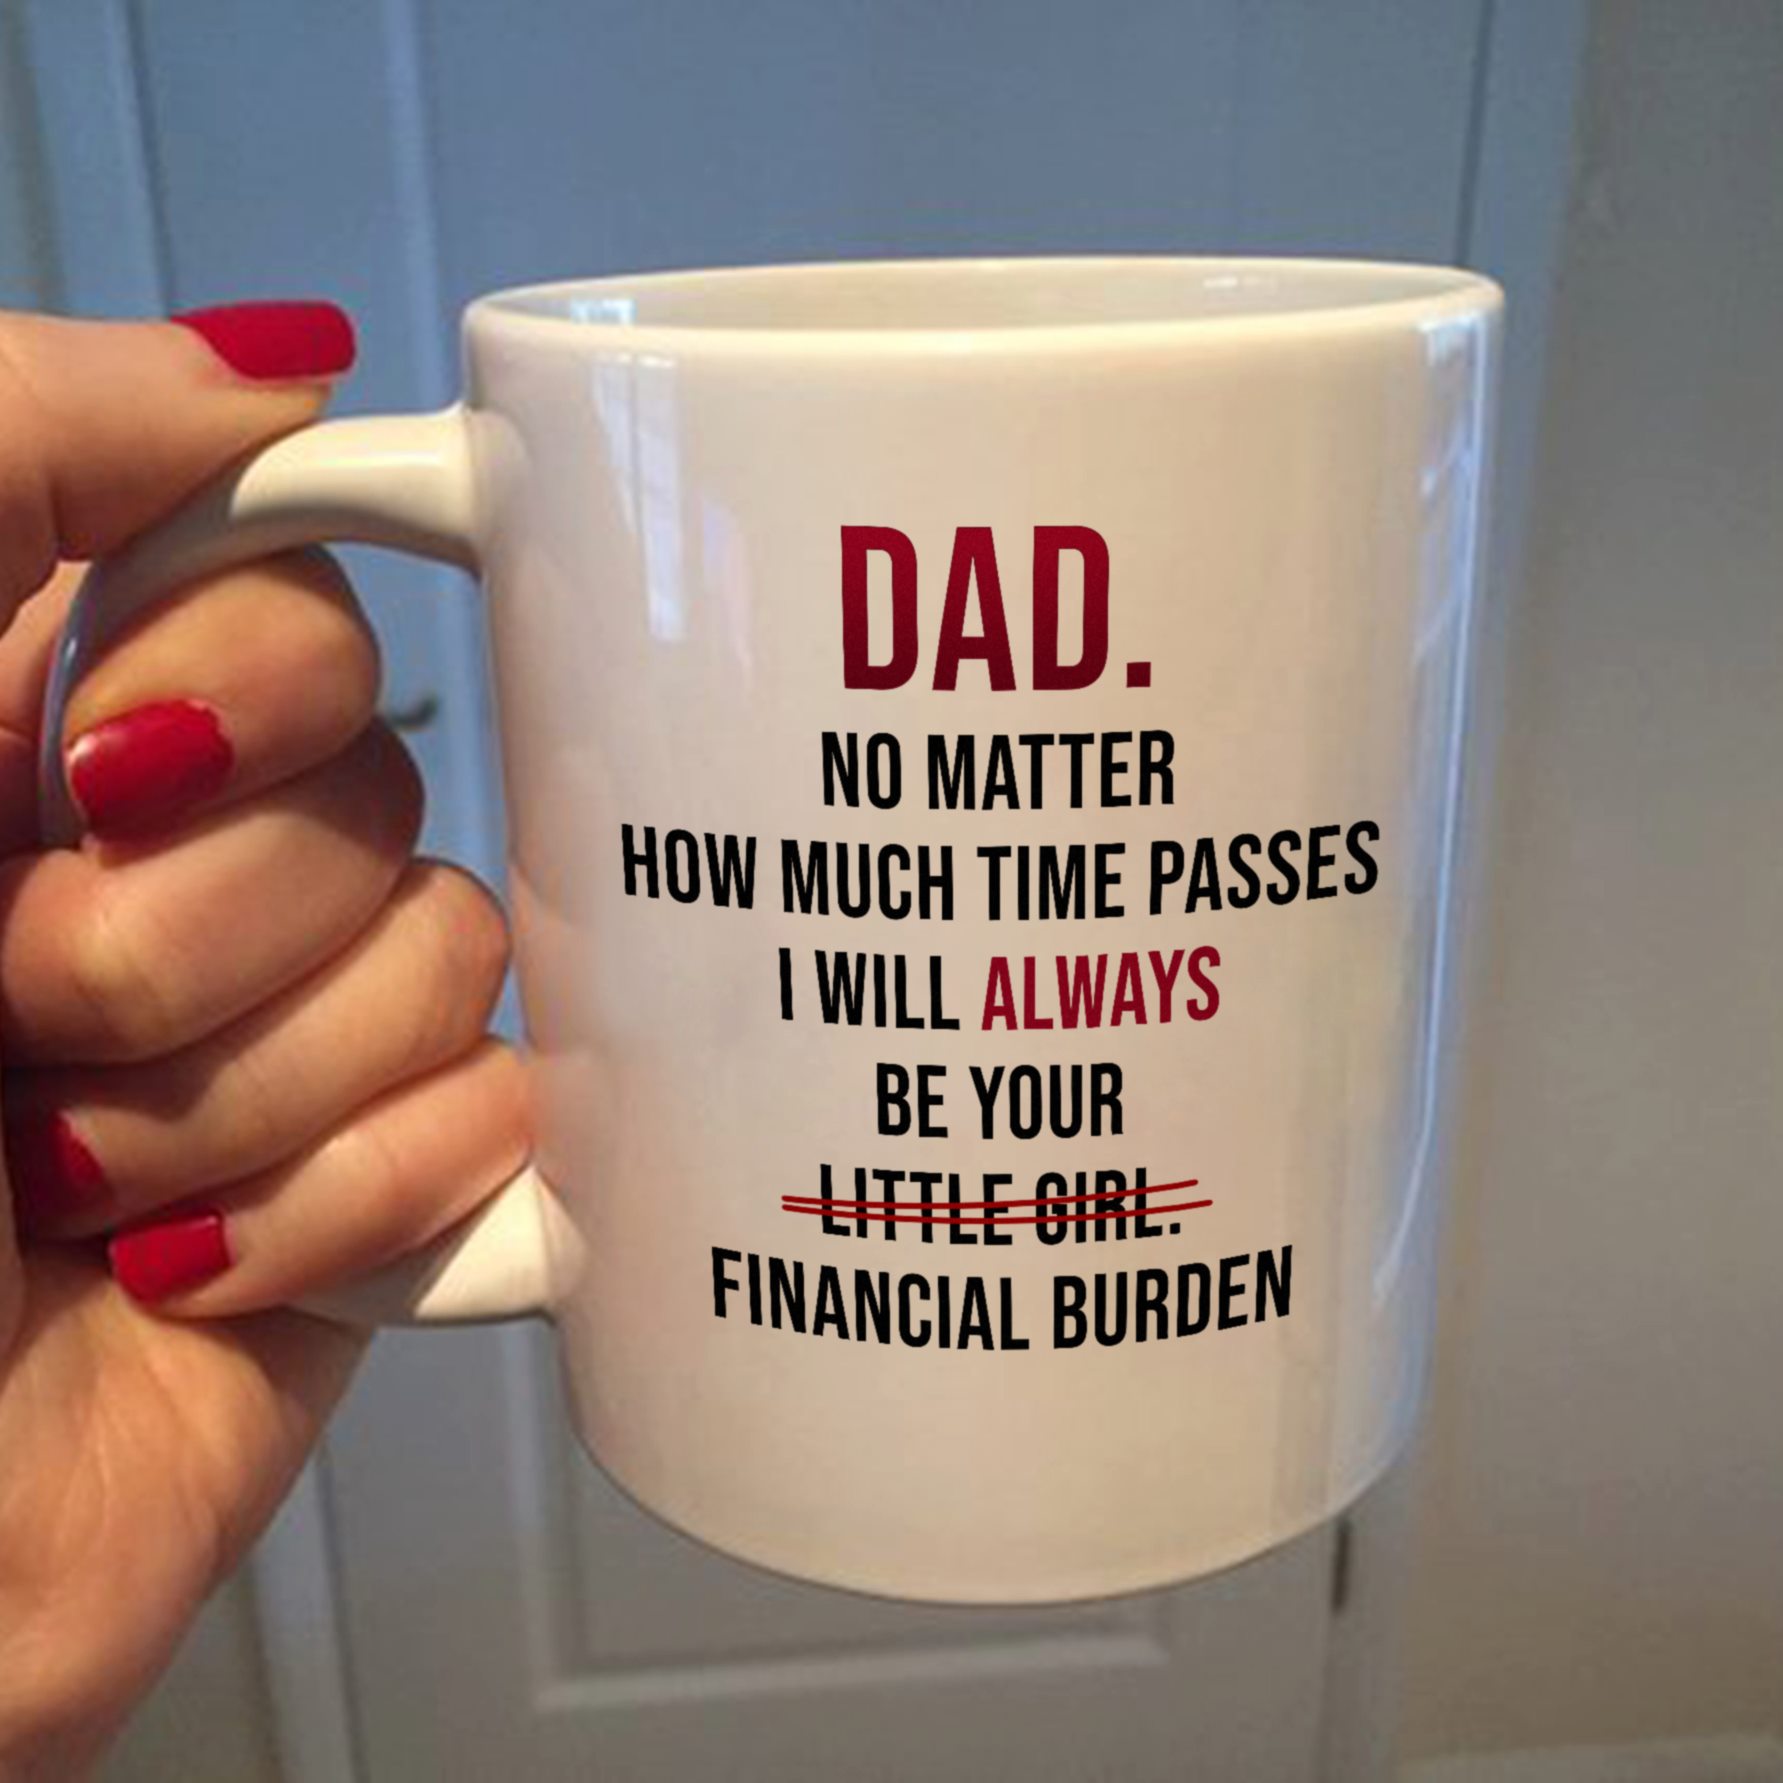 Dad no matter how much time passes I will always be your little girl financial burden mug